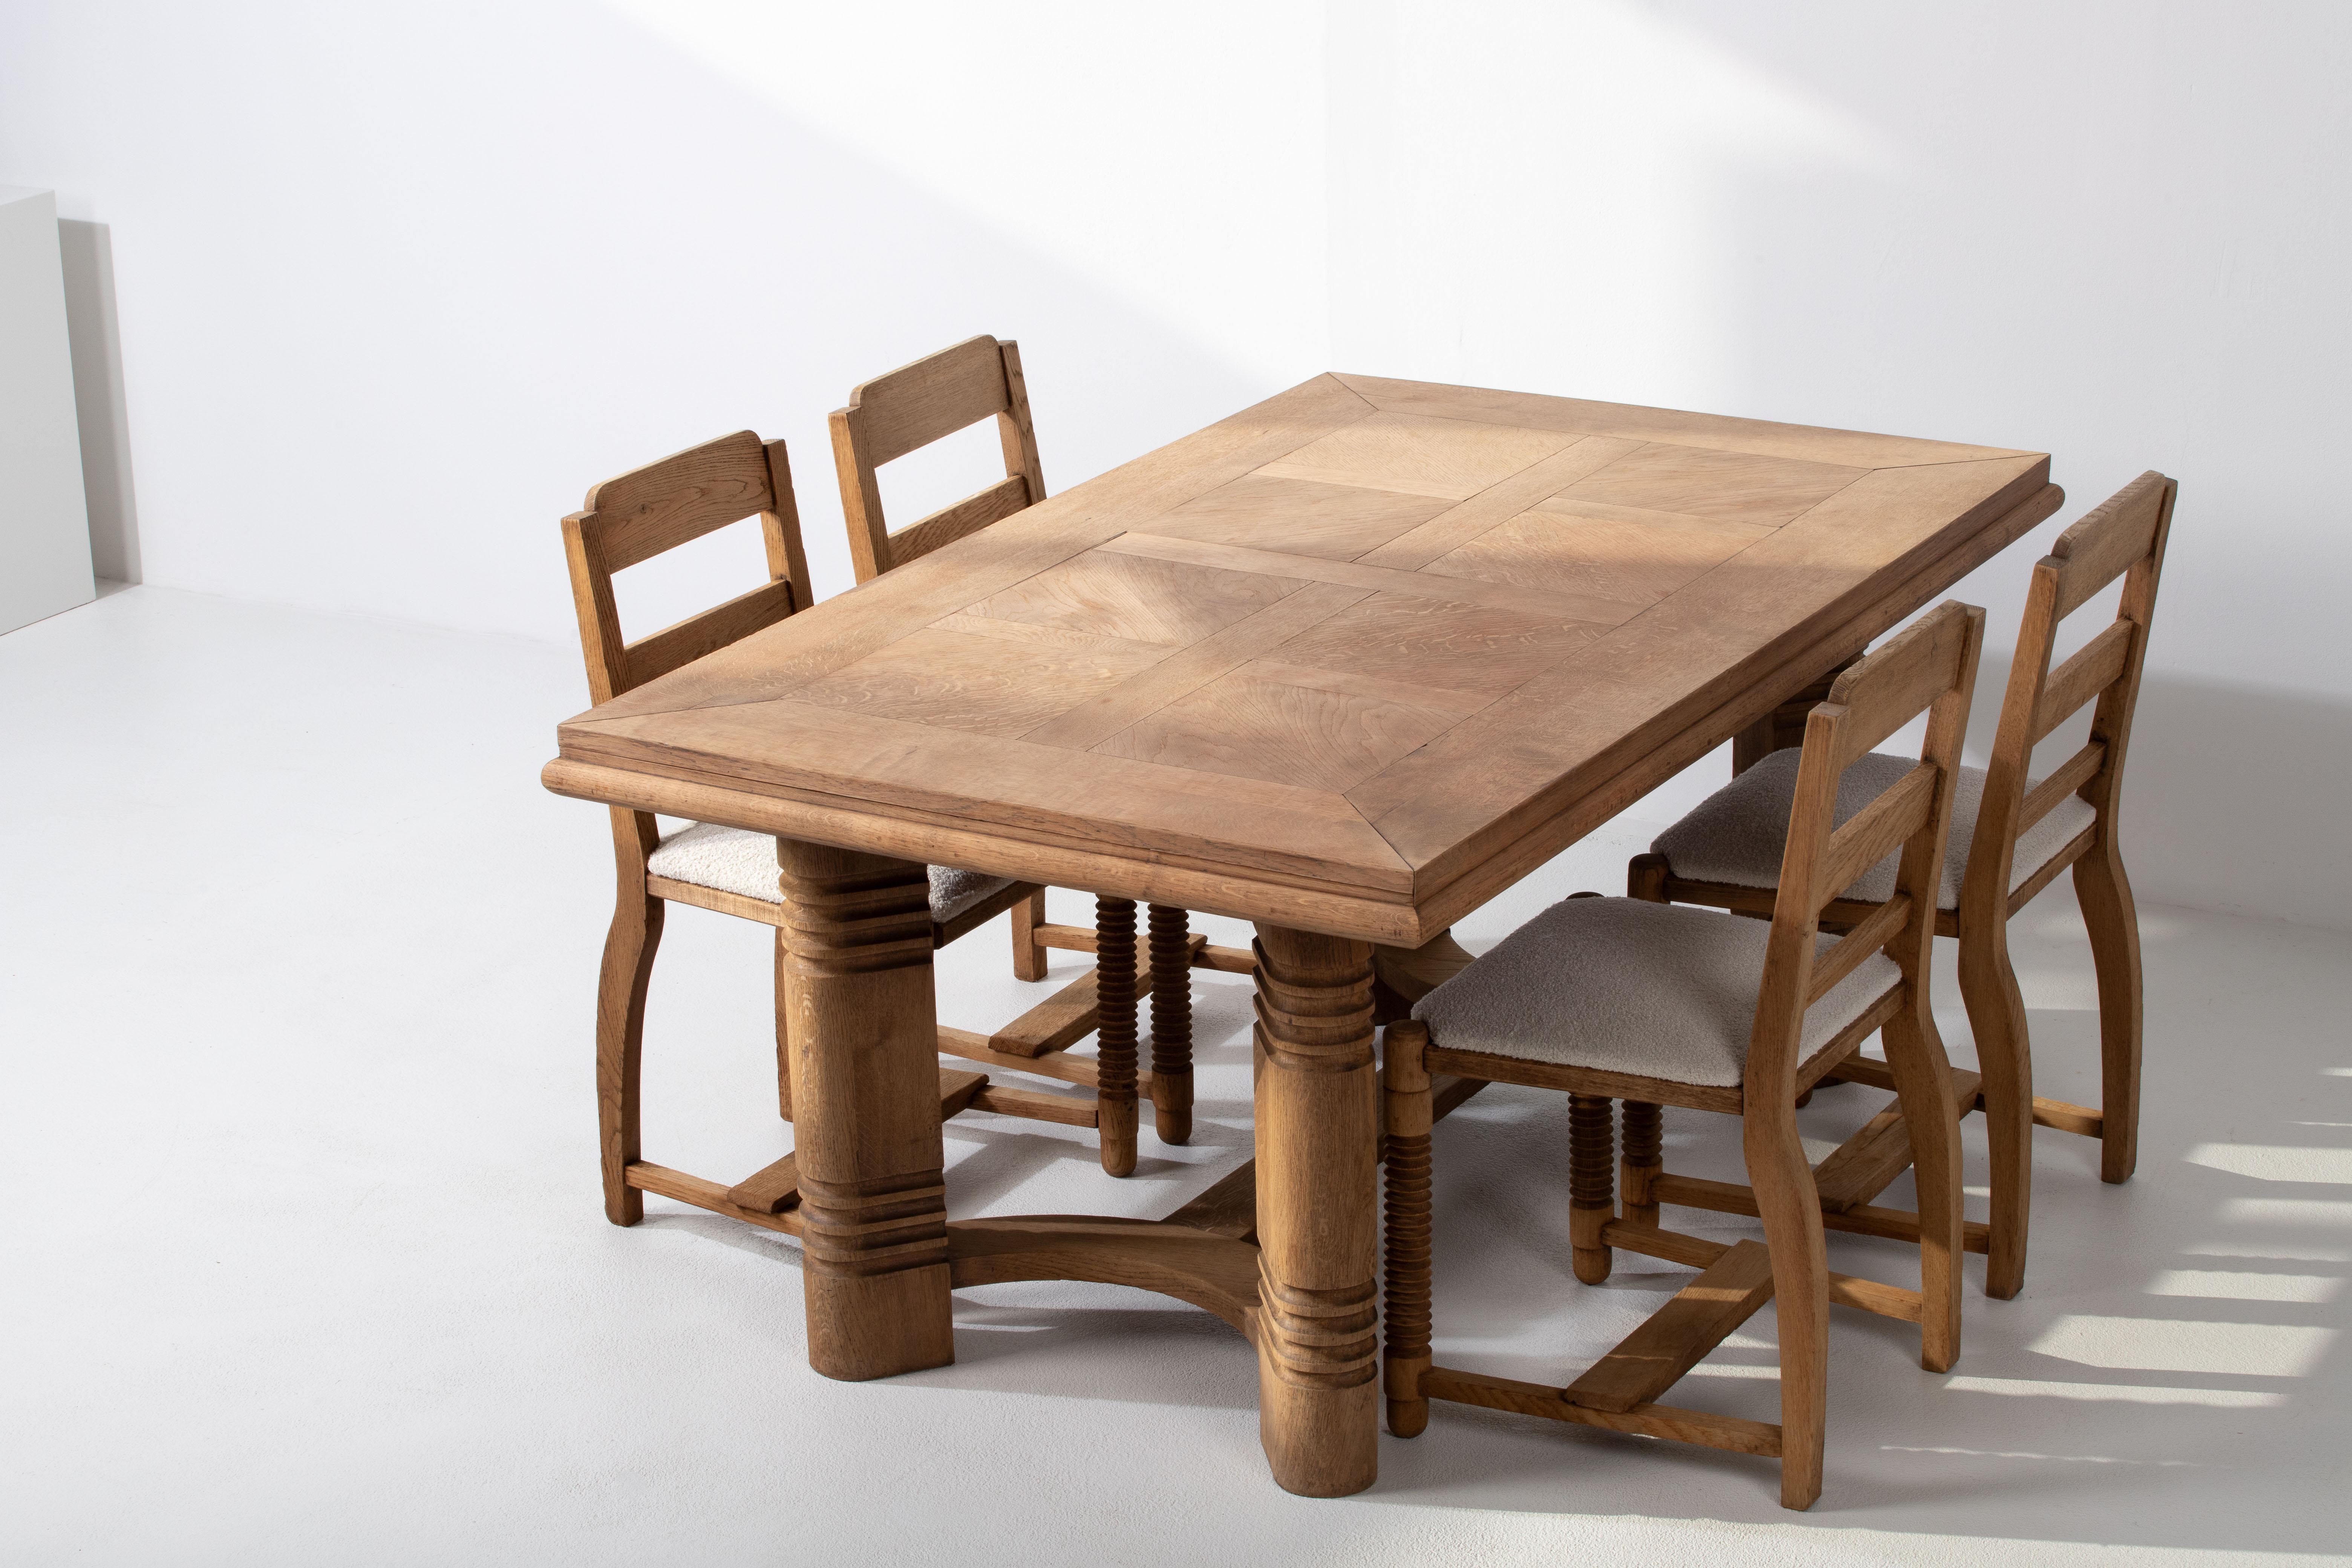 Introducing a Stunning French Art Deco Dining Table in Oak

Step into the world of timeless design with our French Art Deco dining table. This piece pays homage to the renowned Charles Dudouyt, a master craftsman celebrated for his impeccable work